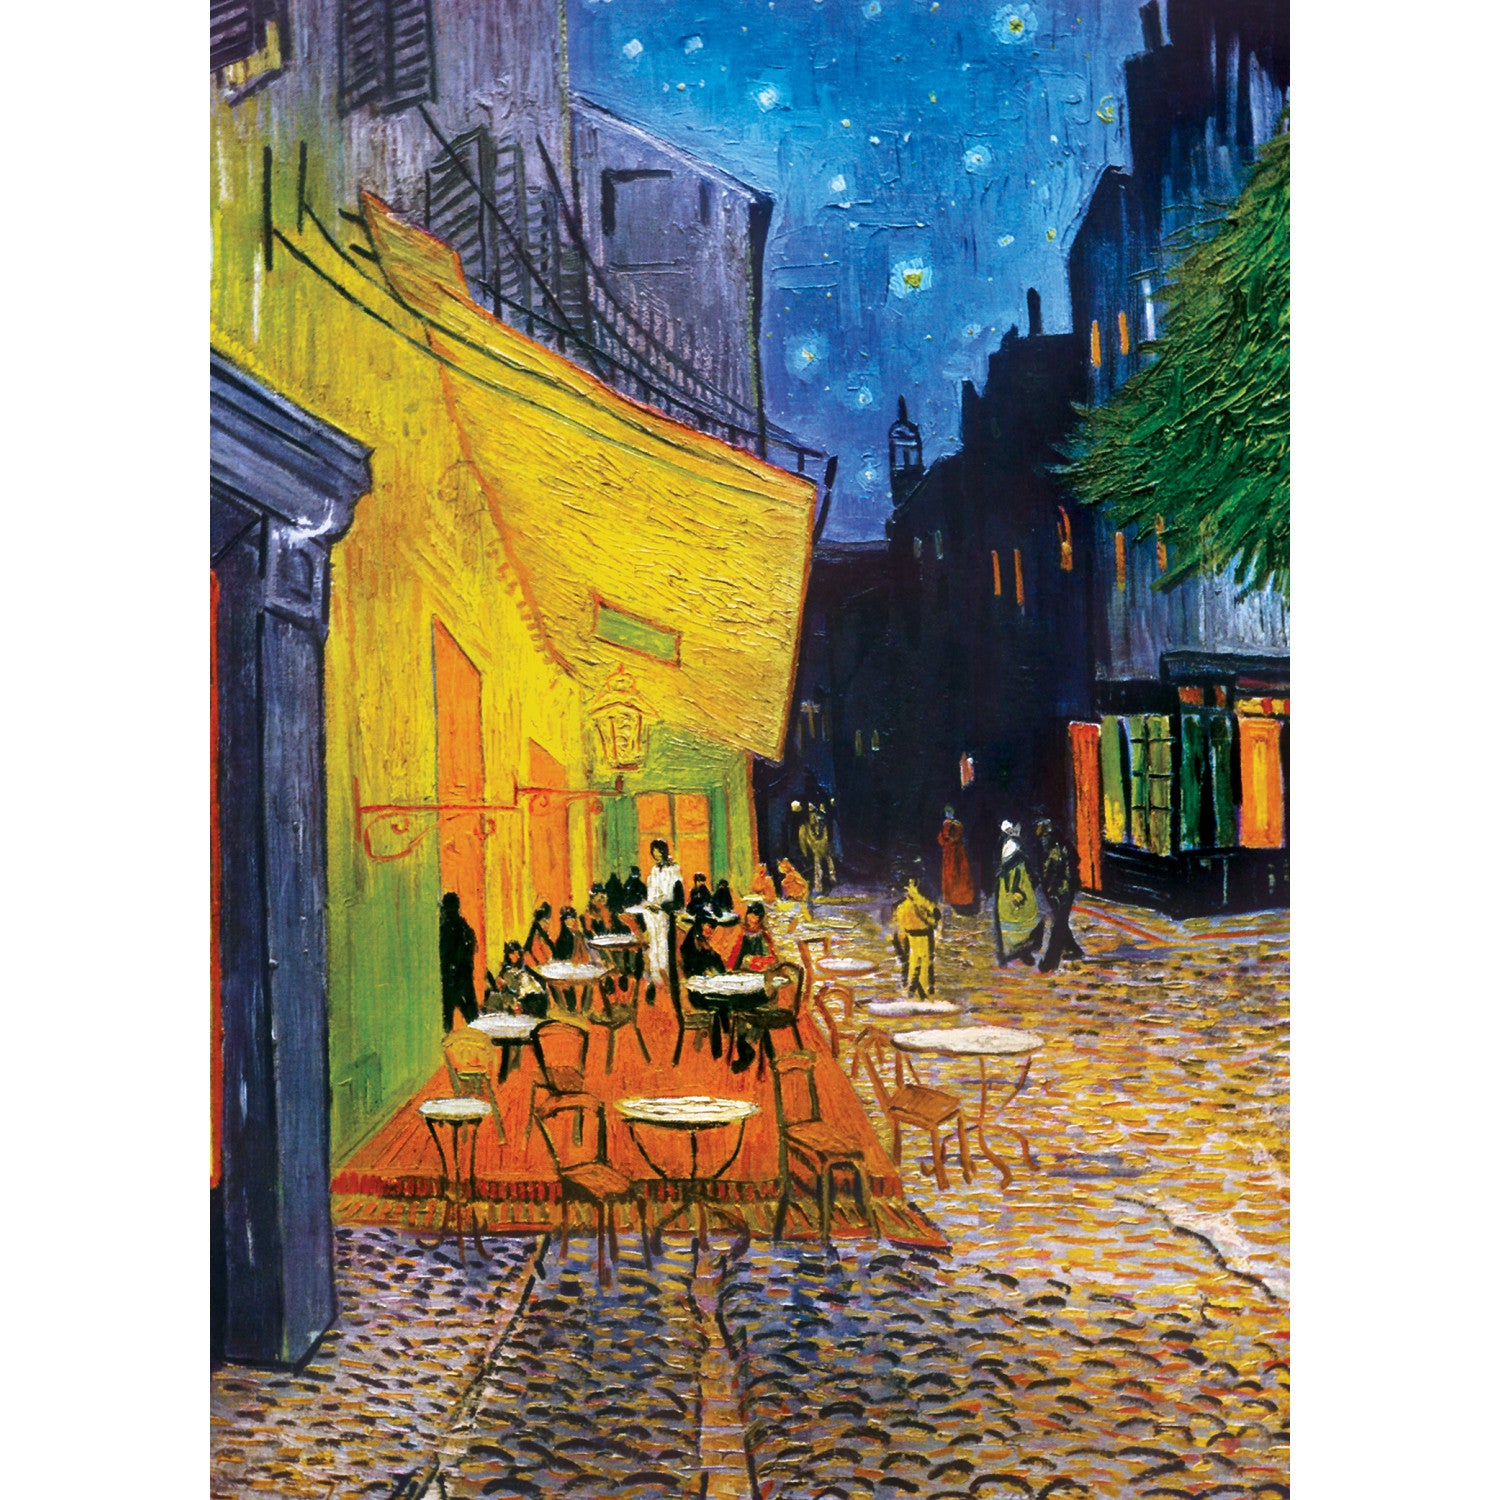 MasterPieces of Art - Cafe Terrace at Night 1000 Piece Puzzle